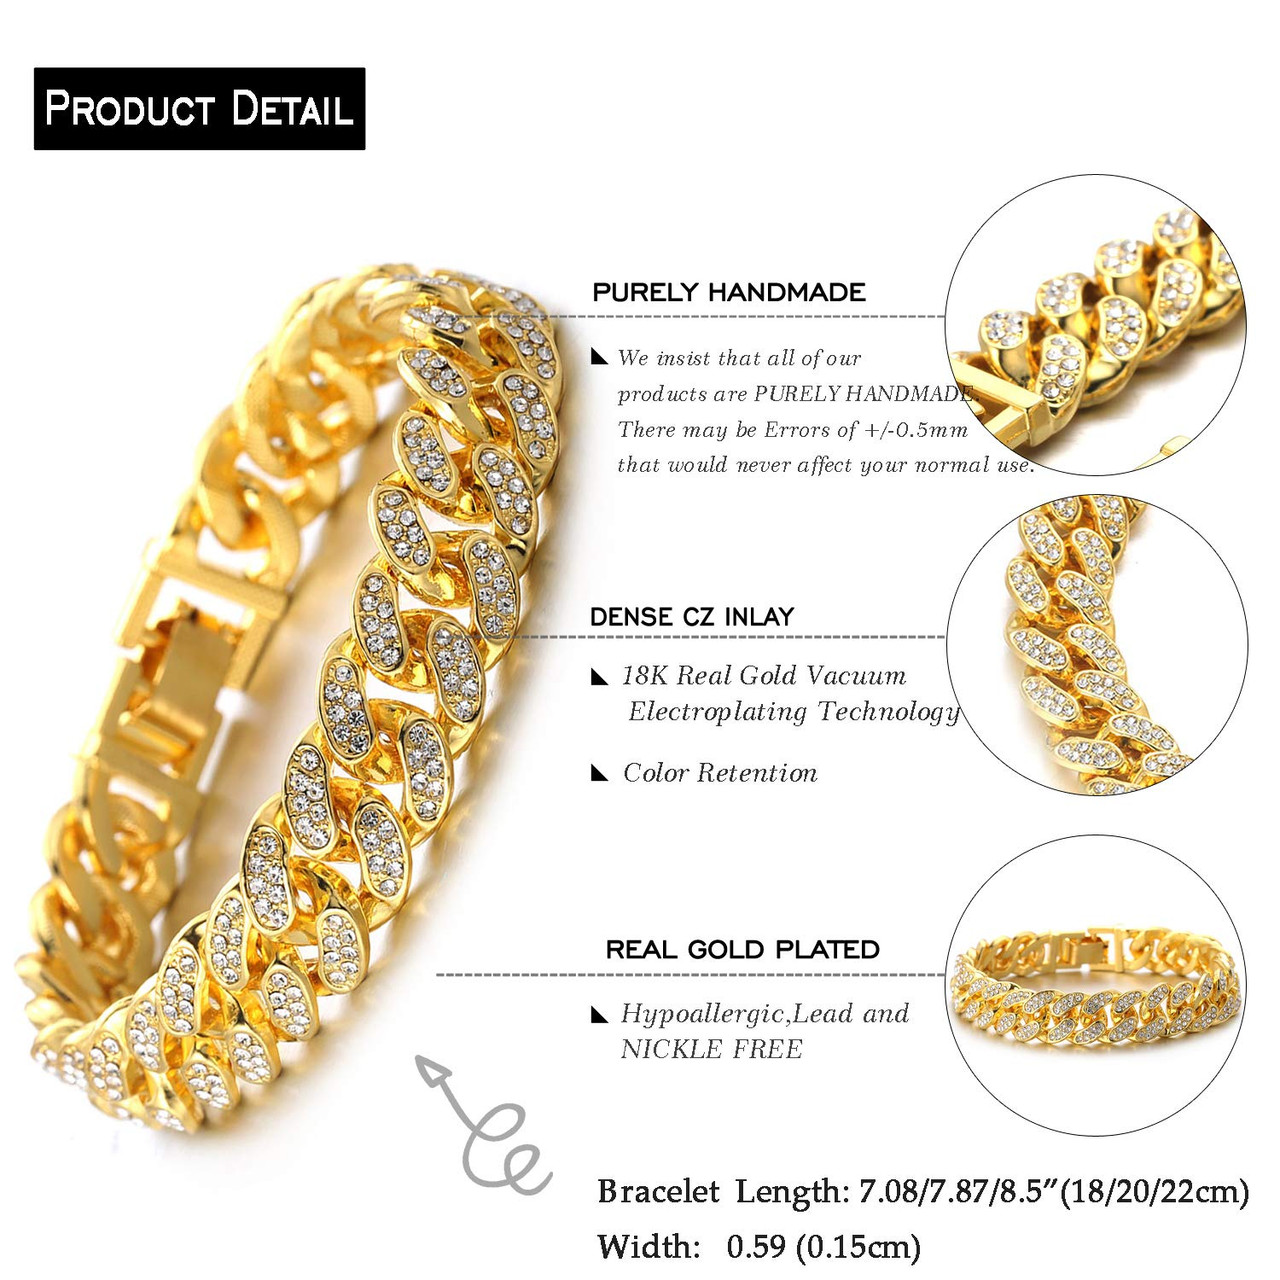 HALUKAKAH Gold Chains for Boys - Tycoon Junior - Kid's 14mm Diamond Cuban Link Chain,18K Real Gold/Platinum White Gold Plated Necklace Bracelet